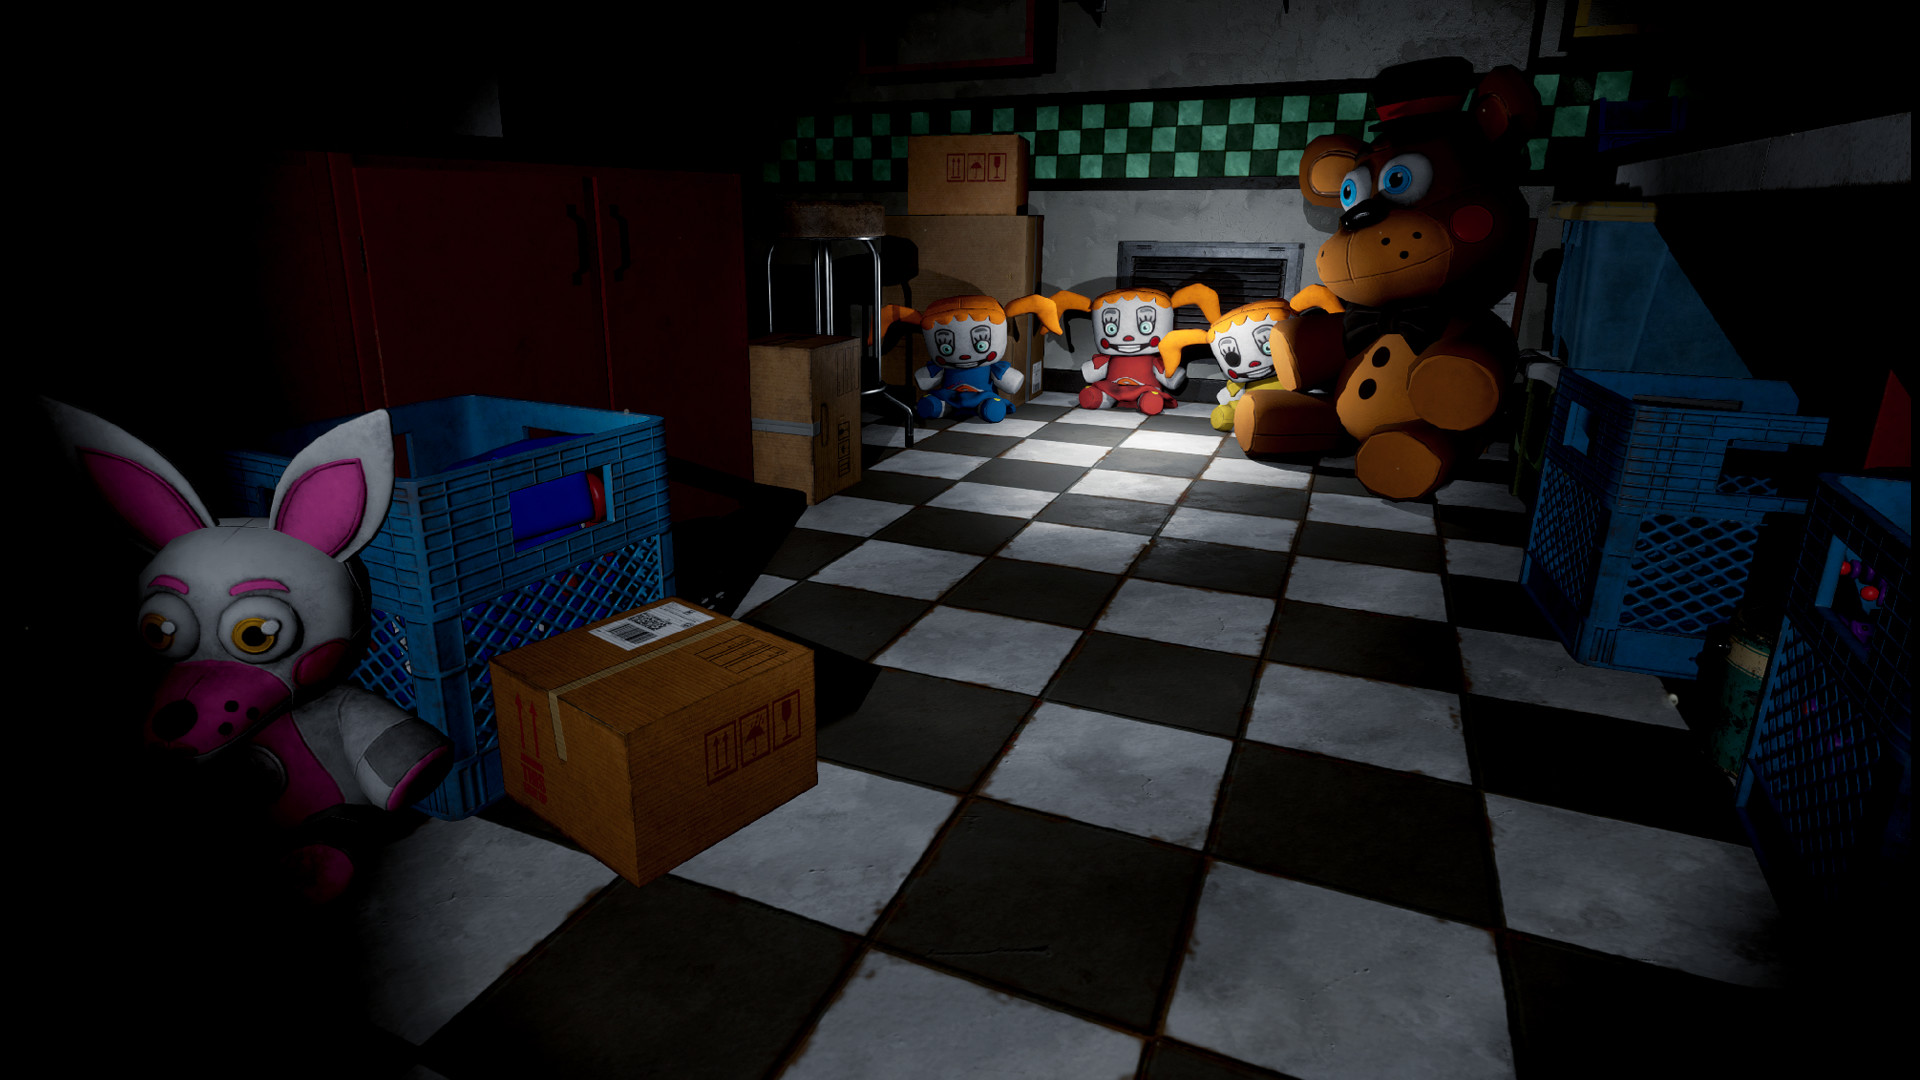 THEY MADE FNAF 4 IN VR AND IS TERRIFYING 